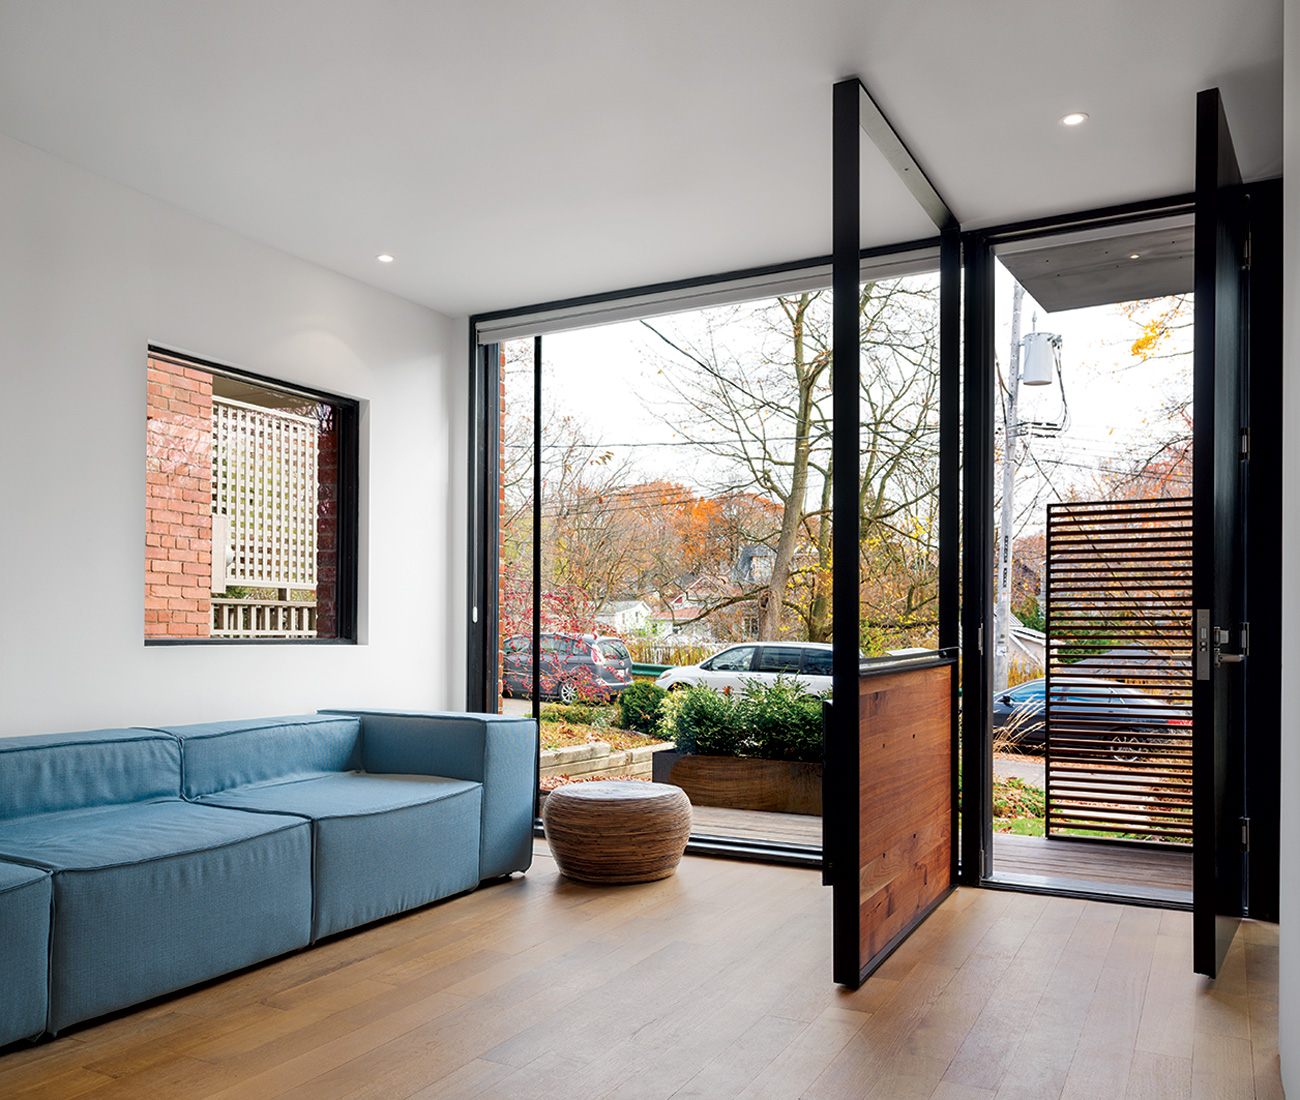 The entryway’s steel frame features a thin tray for stashing keys, and supports a flat screen TV opposite the sofa.